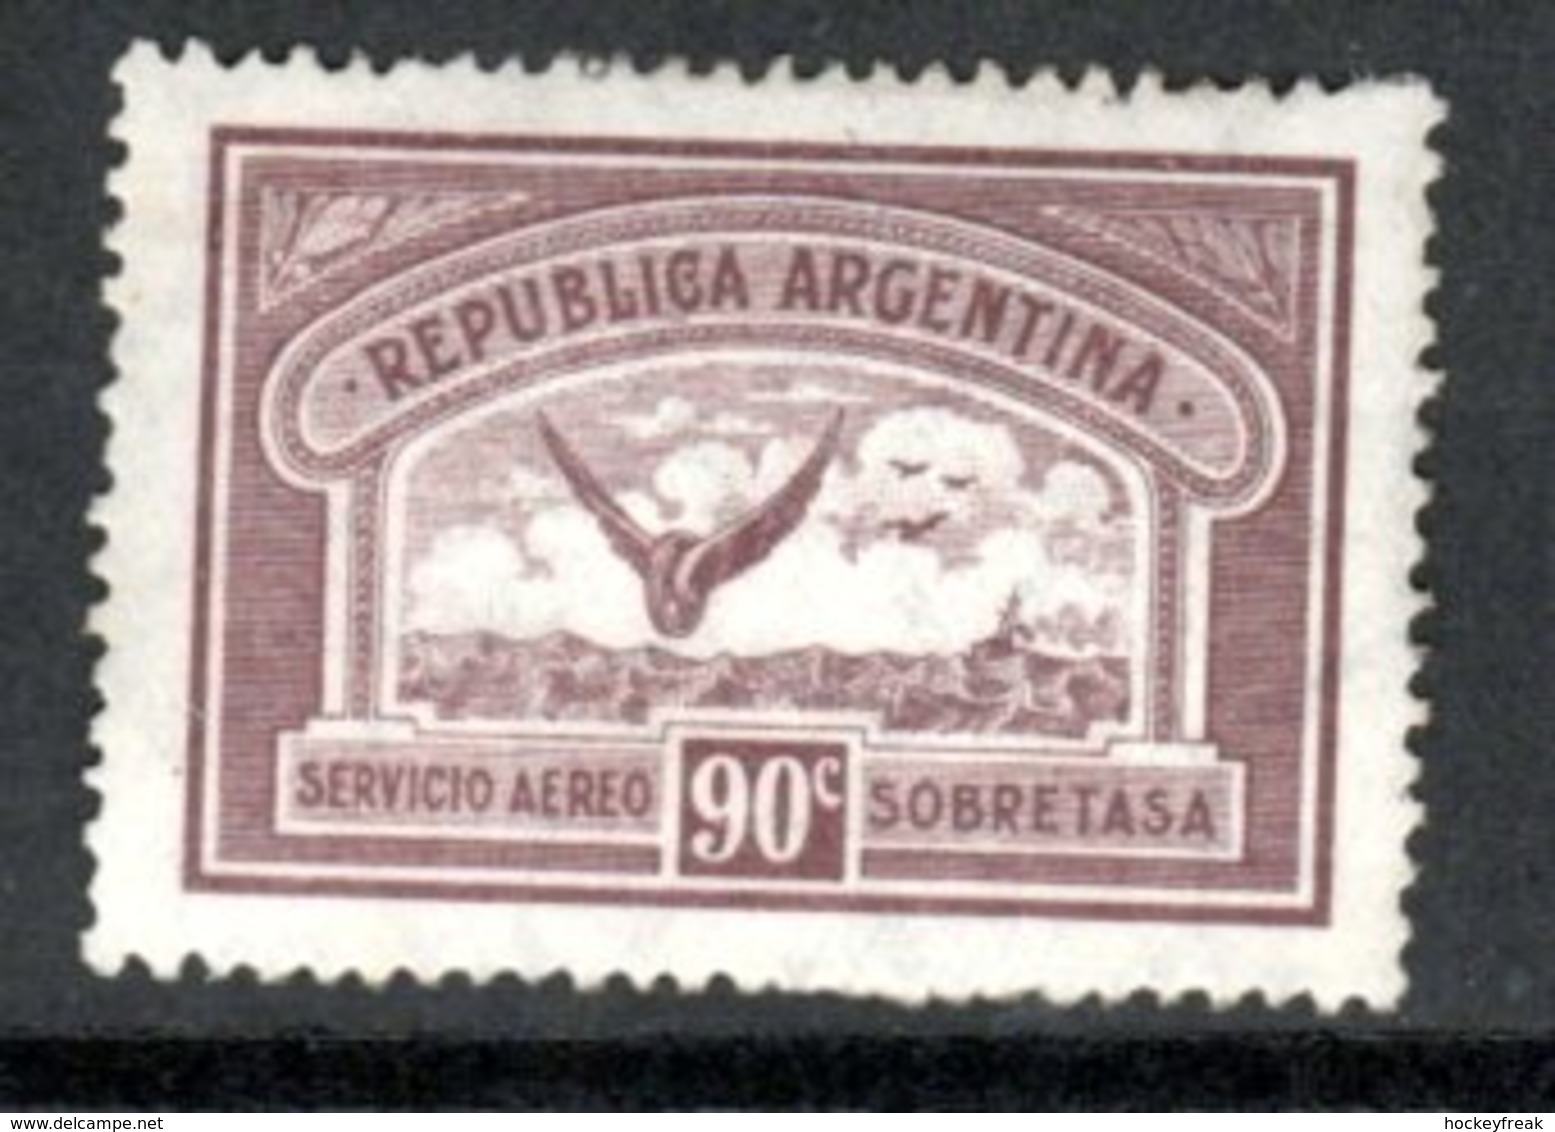 Argentina 1928 - 90c Air Mail Allegory Winged Wheel SG571 VLHM Cat £12 For HM SG2016 - See Full Description Below - Nuevos